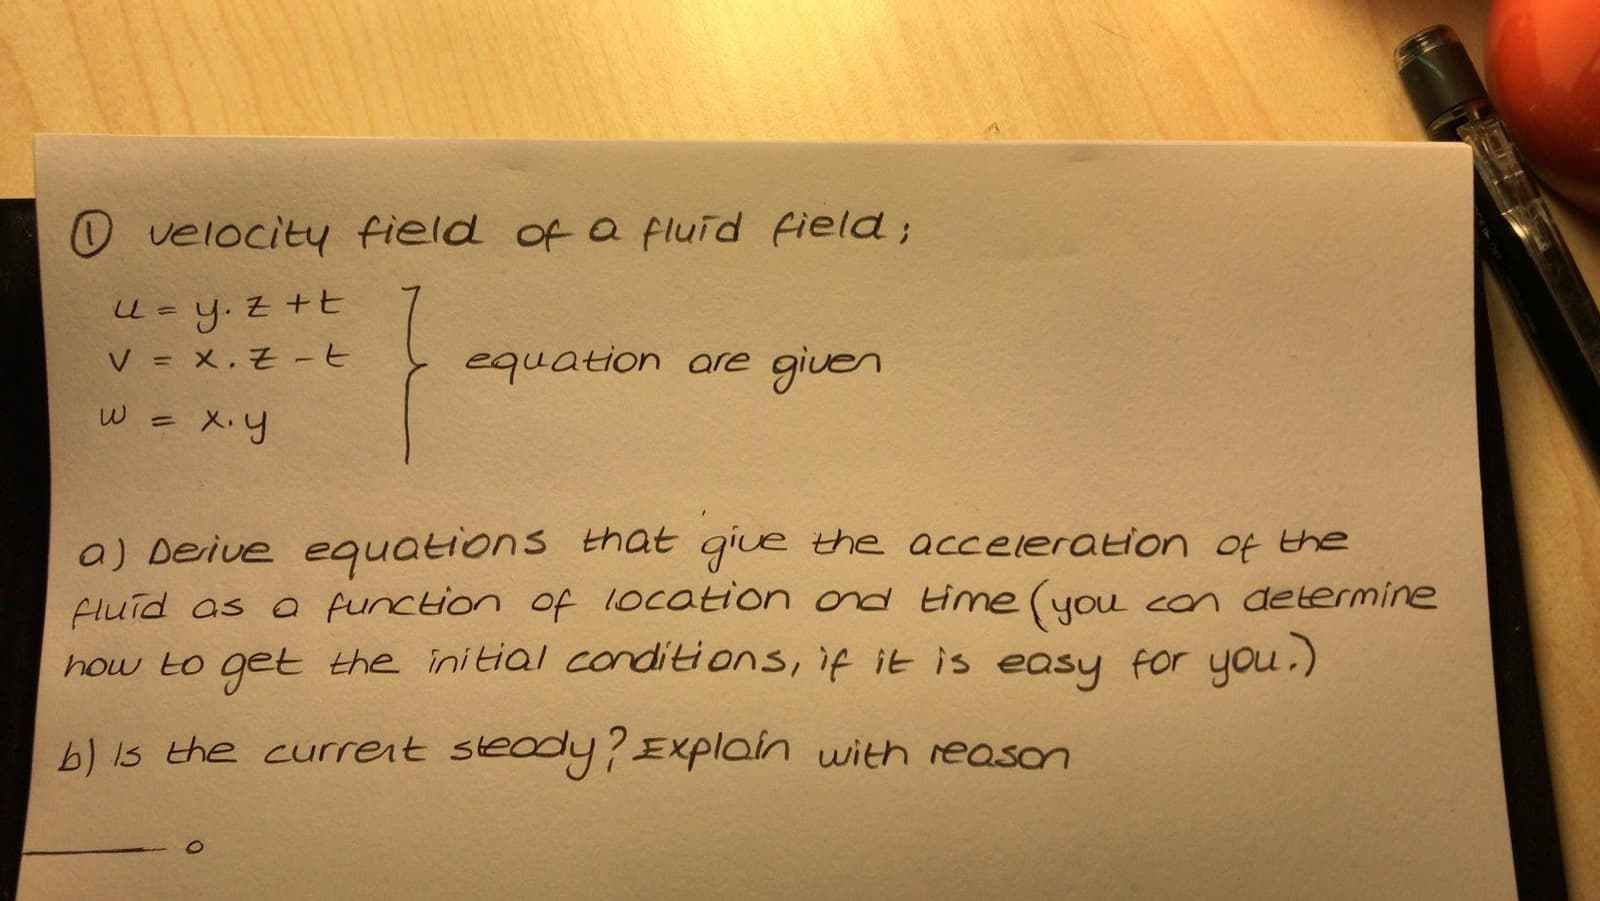 O velocity field of a fluid field;
U- y. z +t
V%= x.근 -6
equation are given
X.y
a) Deive equations that
Fluid as a function of 1ocation ond Hime (you con determine
how to get the initial conditions, if it is easy for you.)
giue the acceleration of the
b) Is the current steody?Explain with reason
